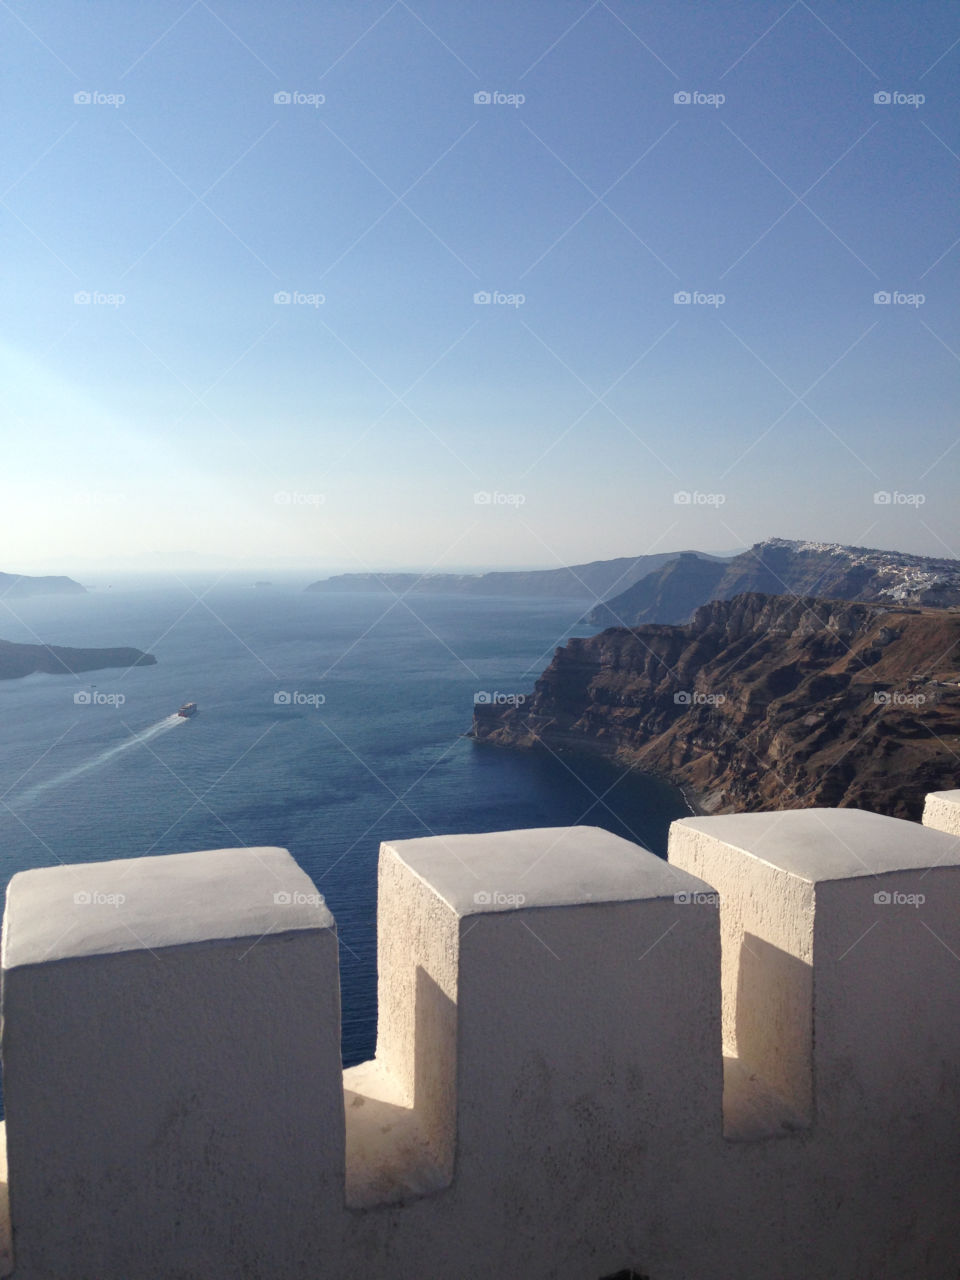 Looking over the cliffs of Santorini just before sunset